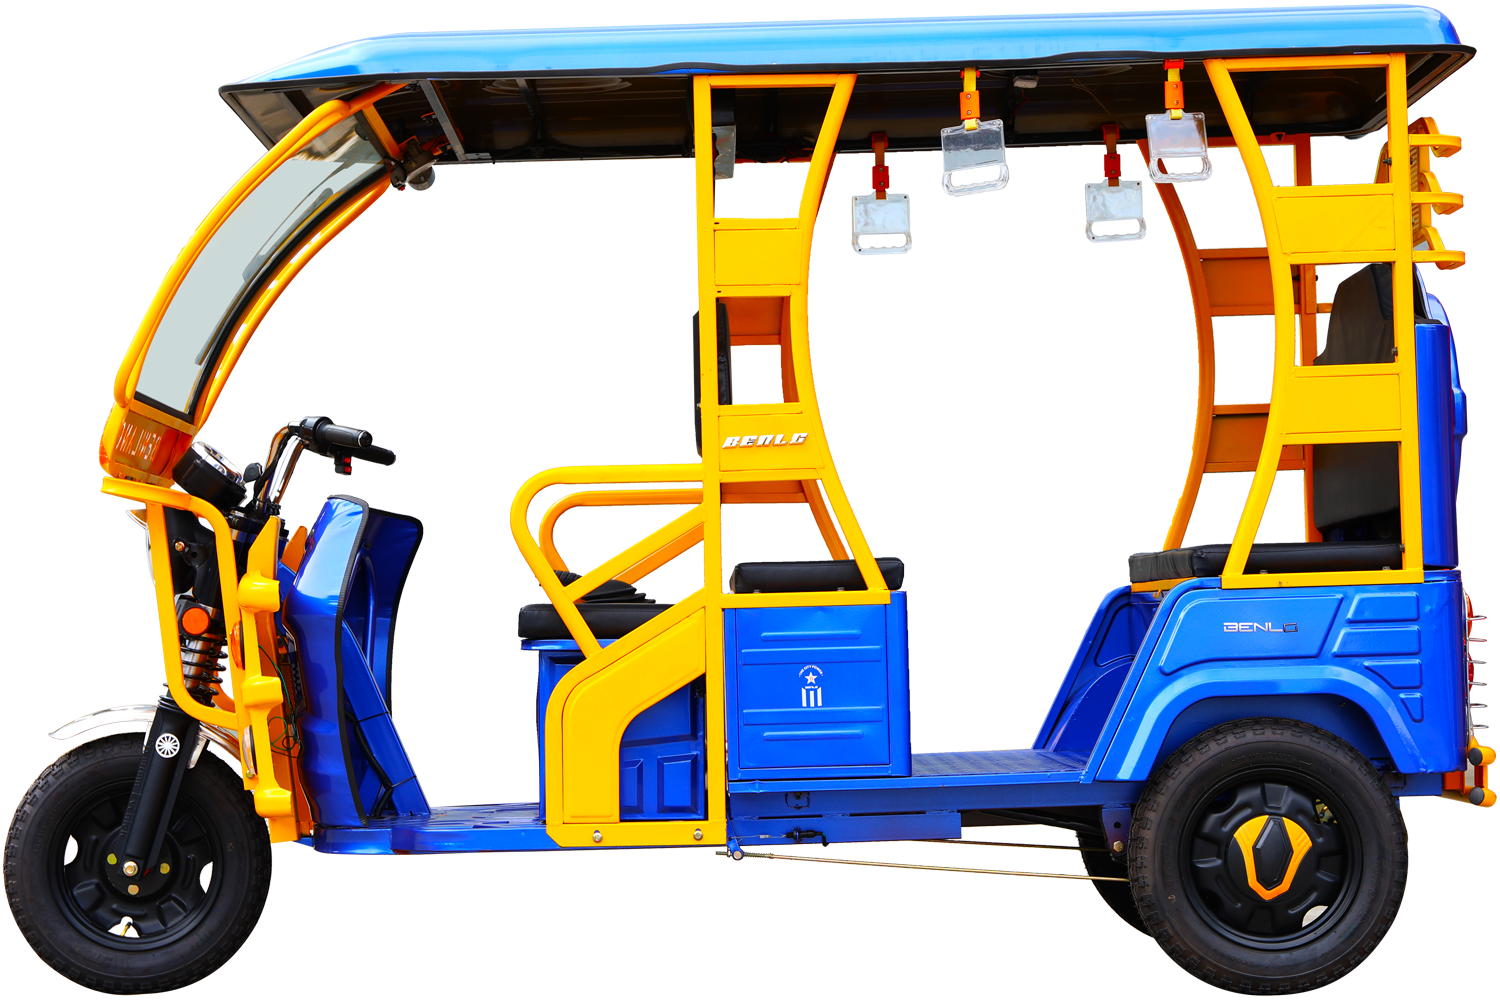 Supply 60V Vacation-2 3 Wheel Electric Tricycle With Seats, 60V Vacation-2 3 Wheel Electric Tricycle With Seats Factory Quotes, 60V Vacation-2 3 Wheel Electric Tricycle With Seats Producers